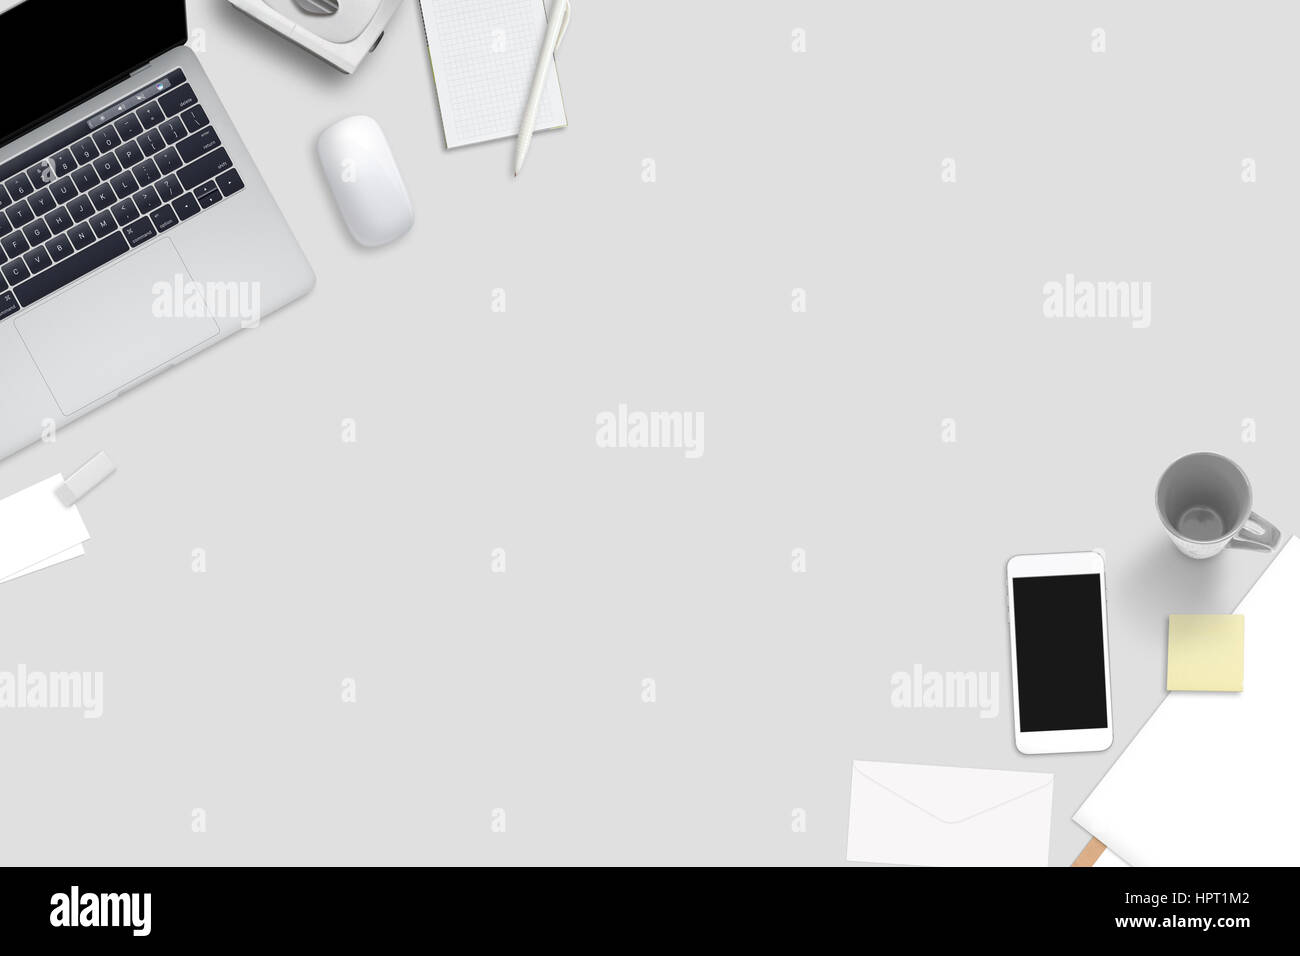 Computer, smart phone and stationery on gray desk. Top view with free space for text. Stock Photo